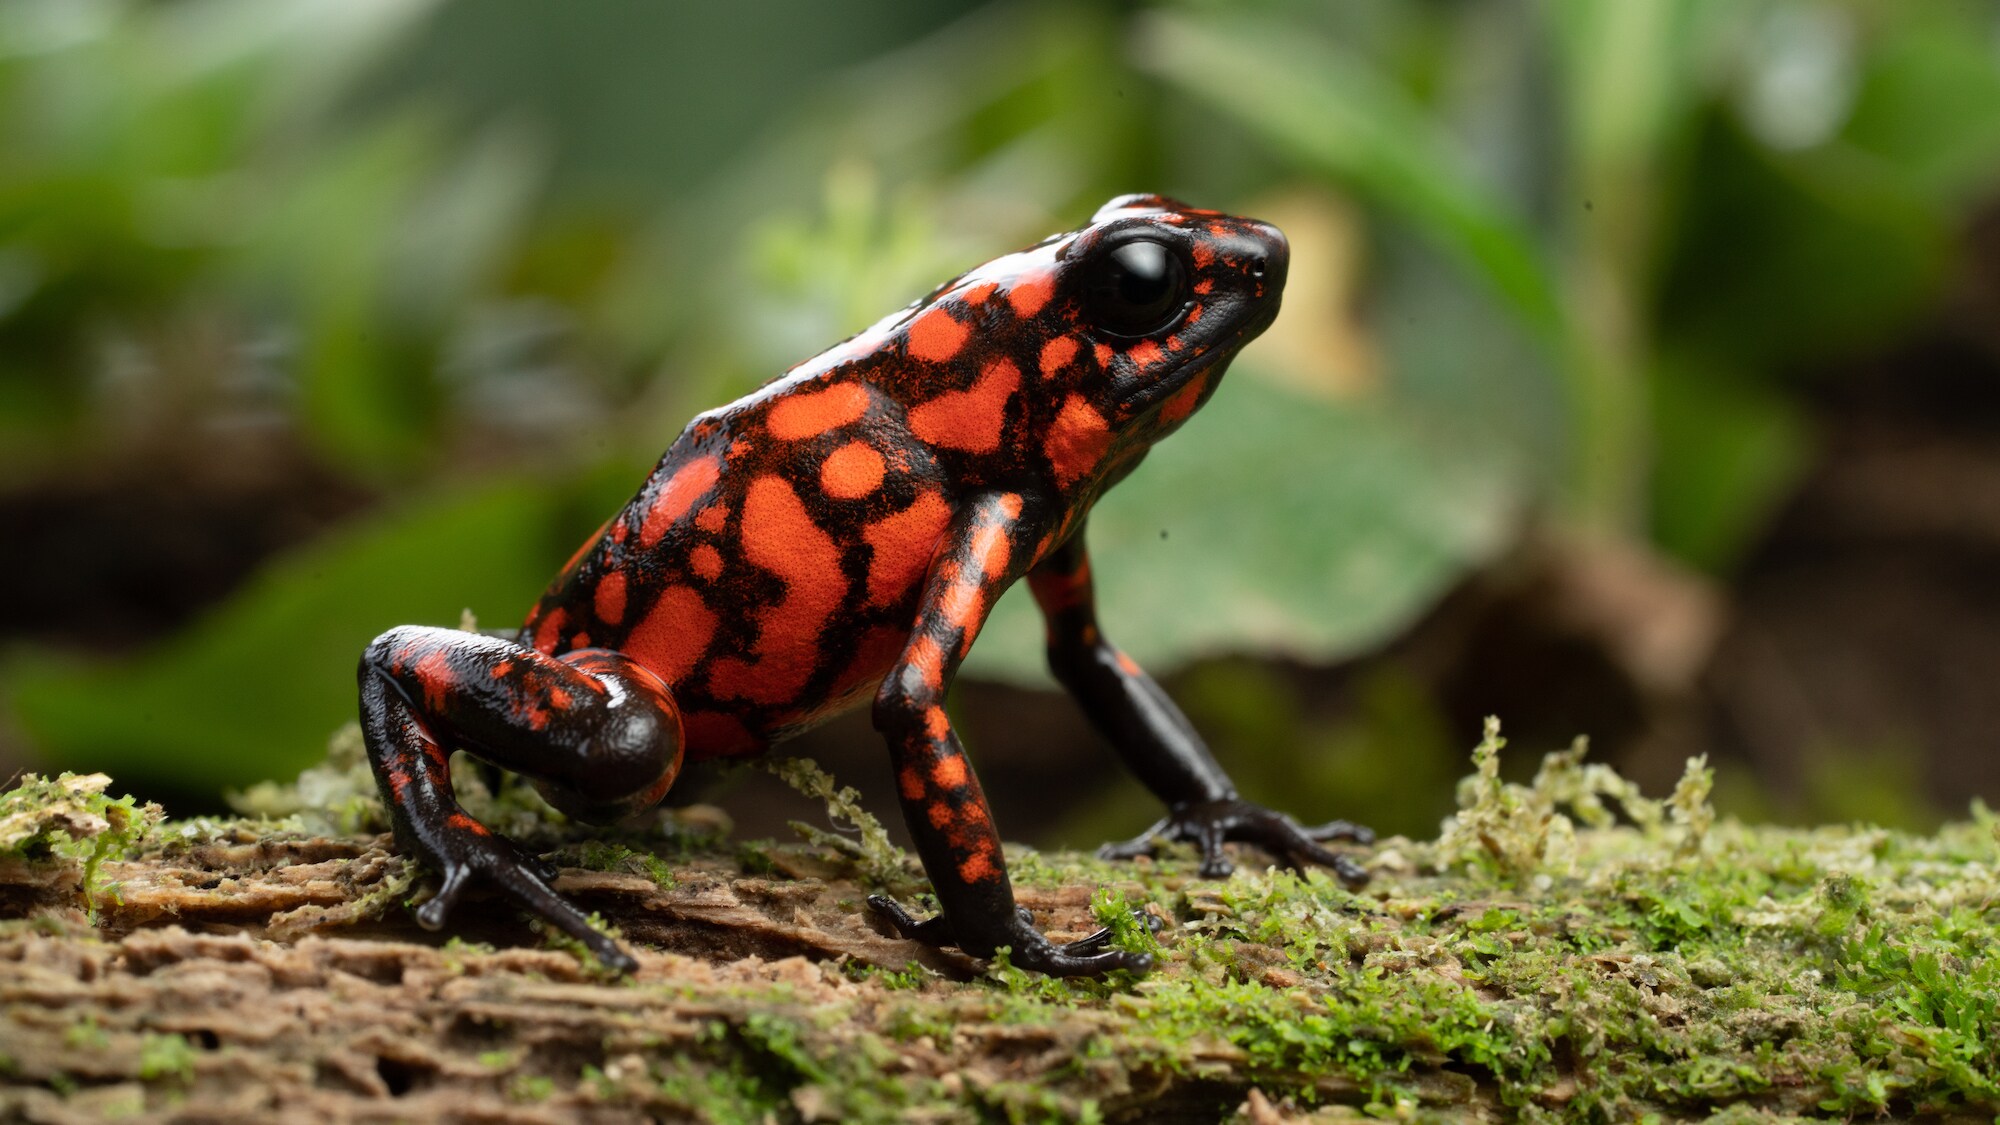 Little devil poison dart frog on a mossy log. (National Geographic for Disney+/Chris Watts)